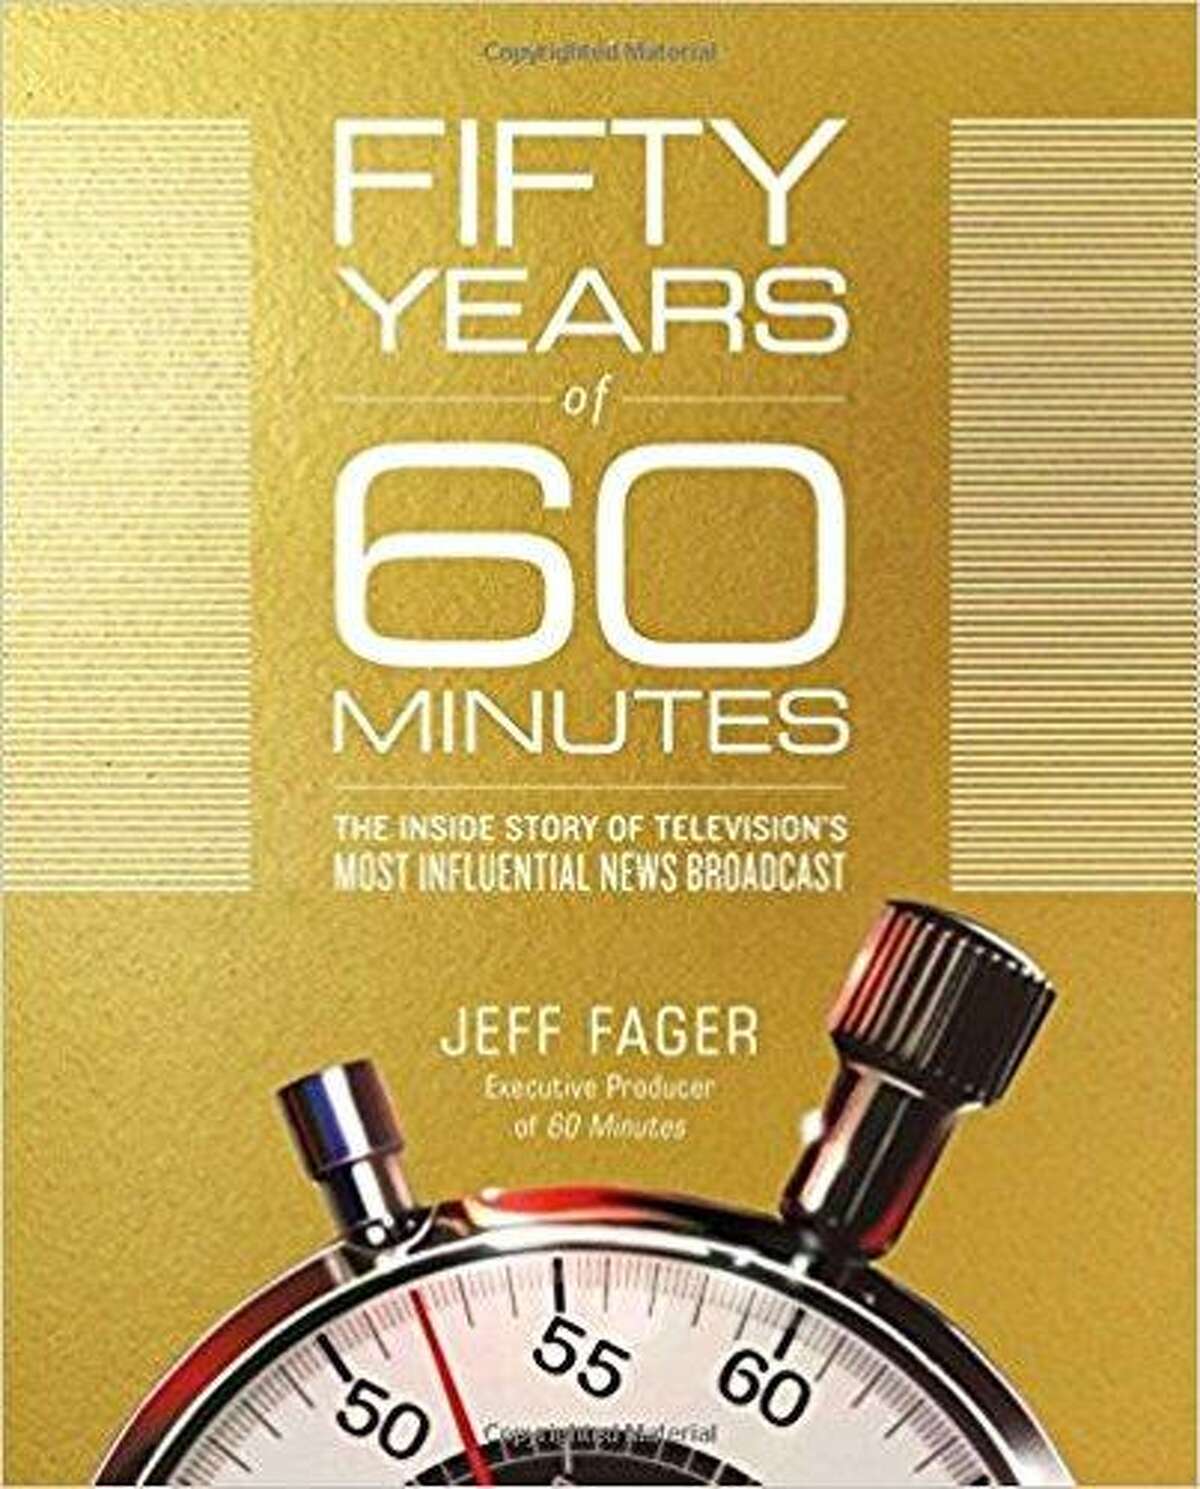 “Fifty Years of 60 Minutes” by Jeff Fager